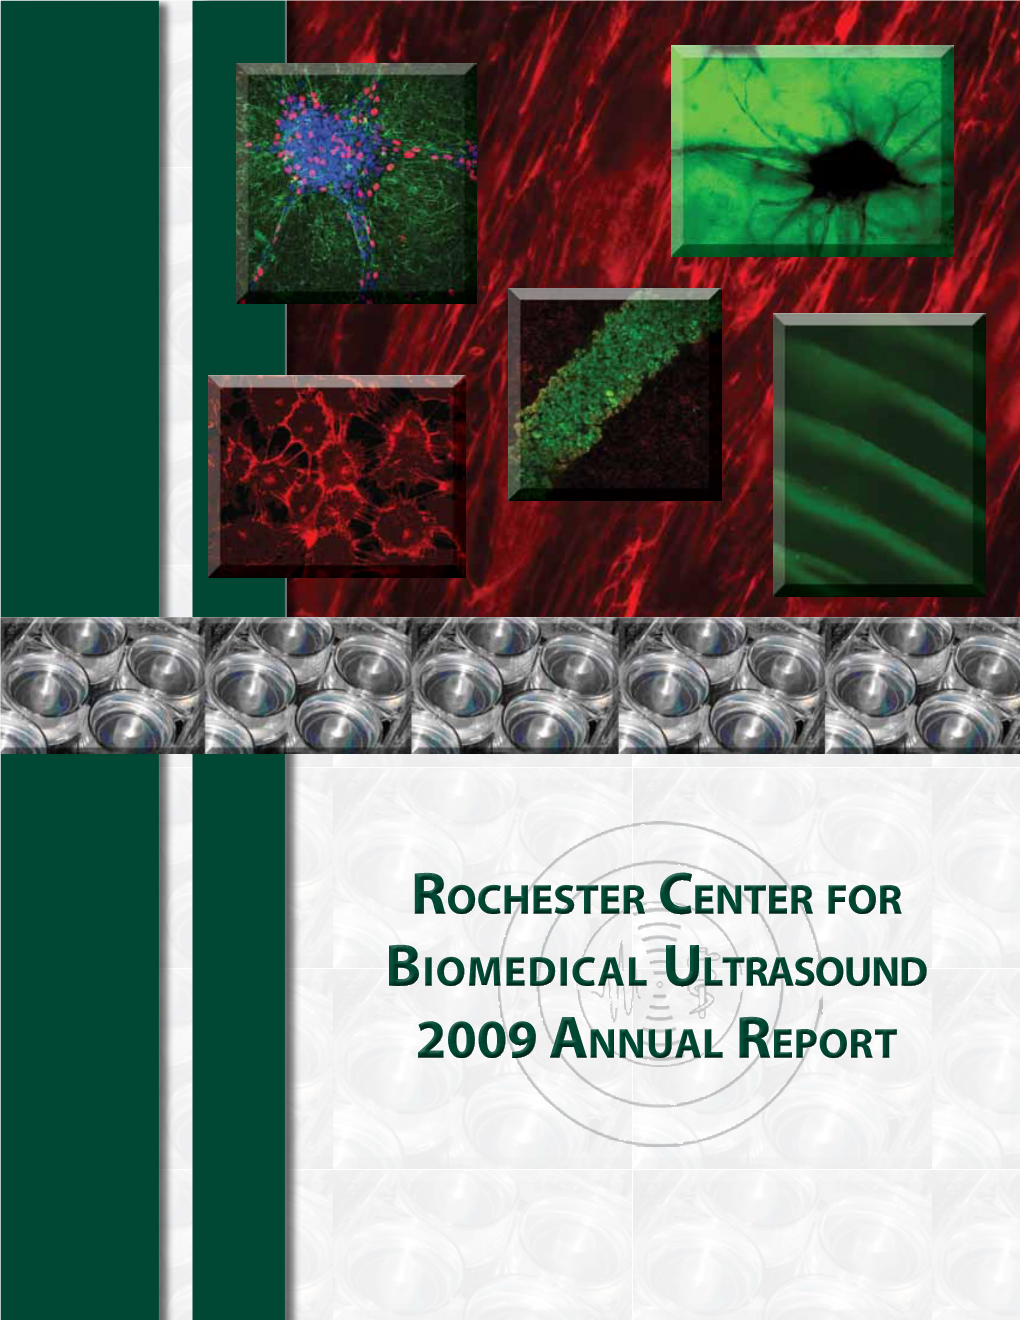 2009 Annual Report on the Cover RCBU Investigators Are Advancing the Use of Ultrasound in Tissue Engineering and Regenerative Medicine